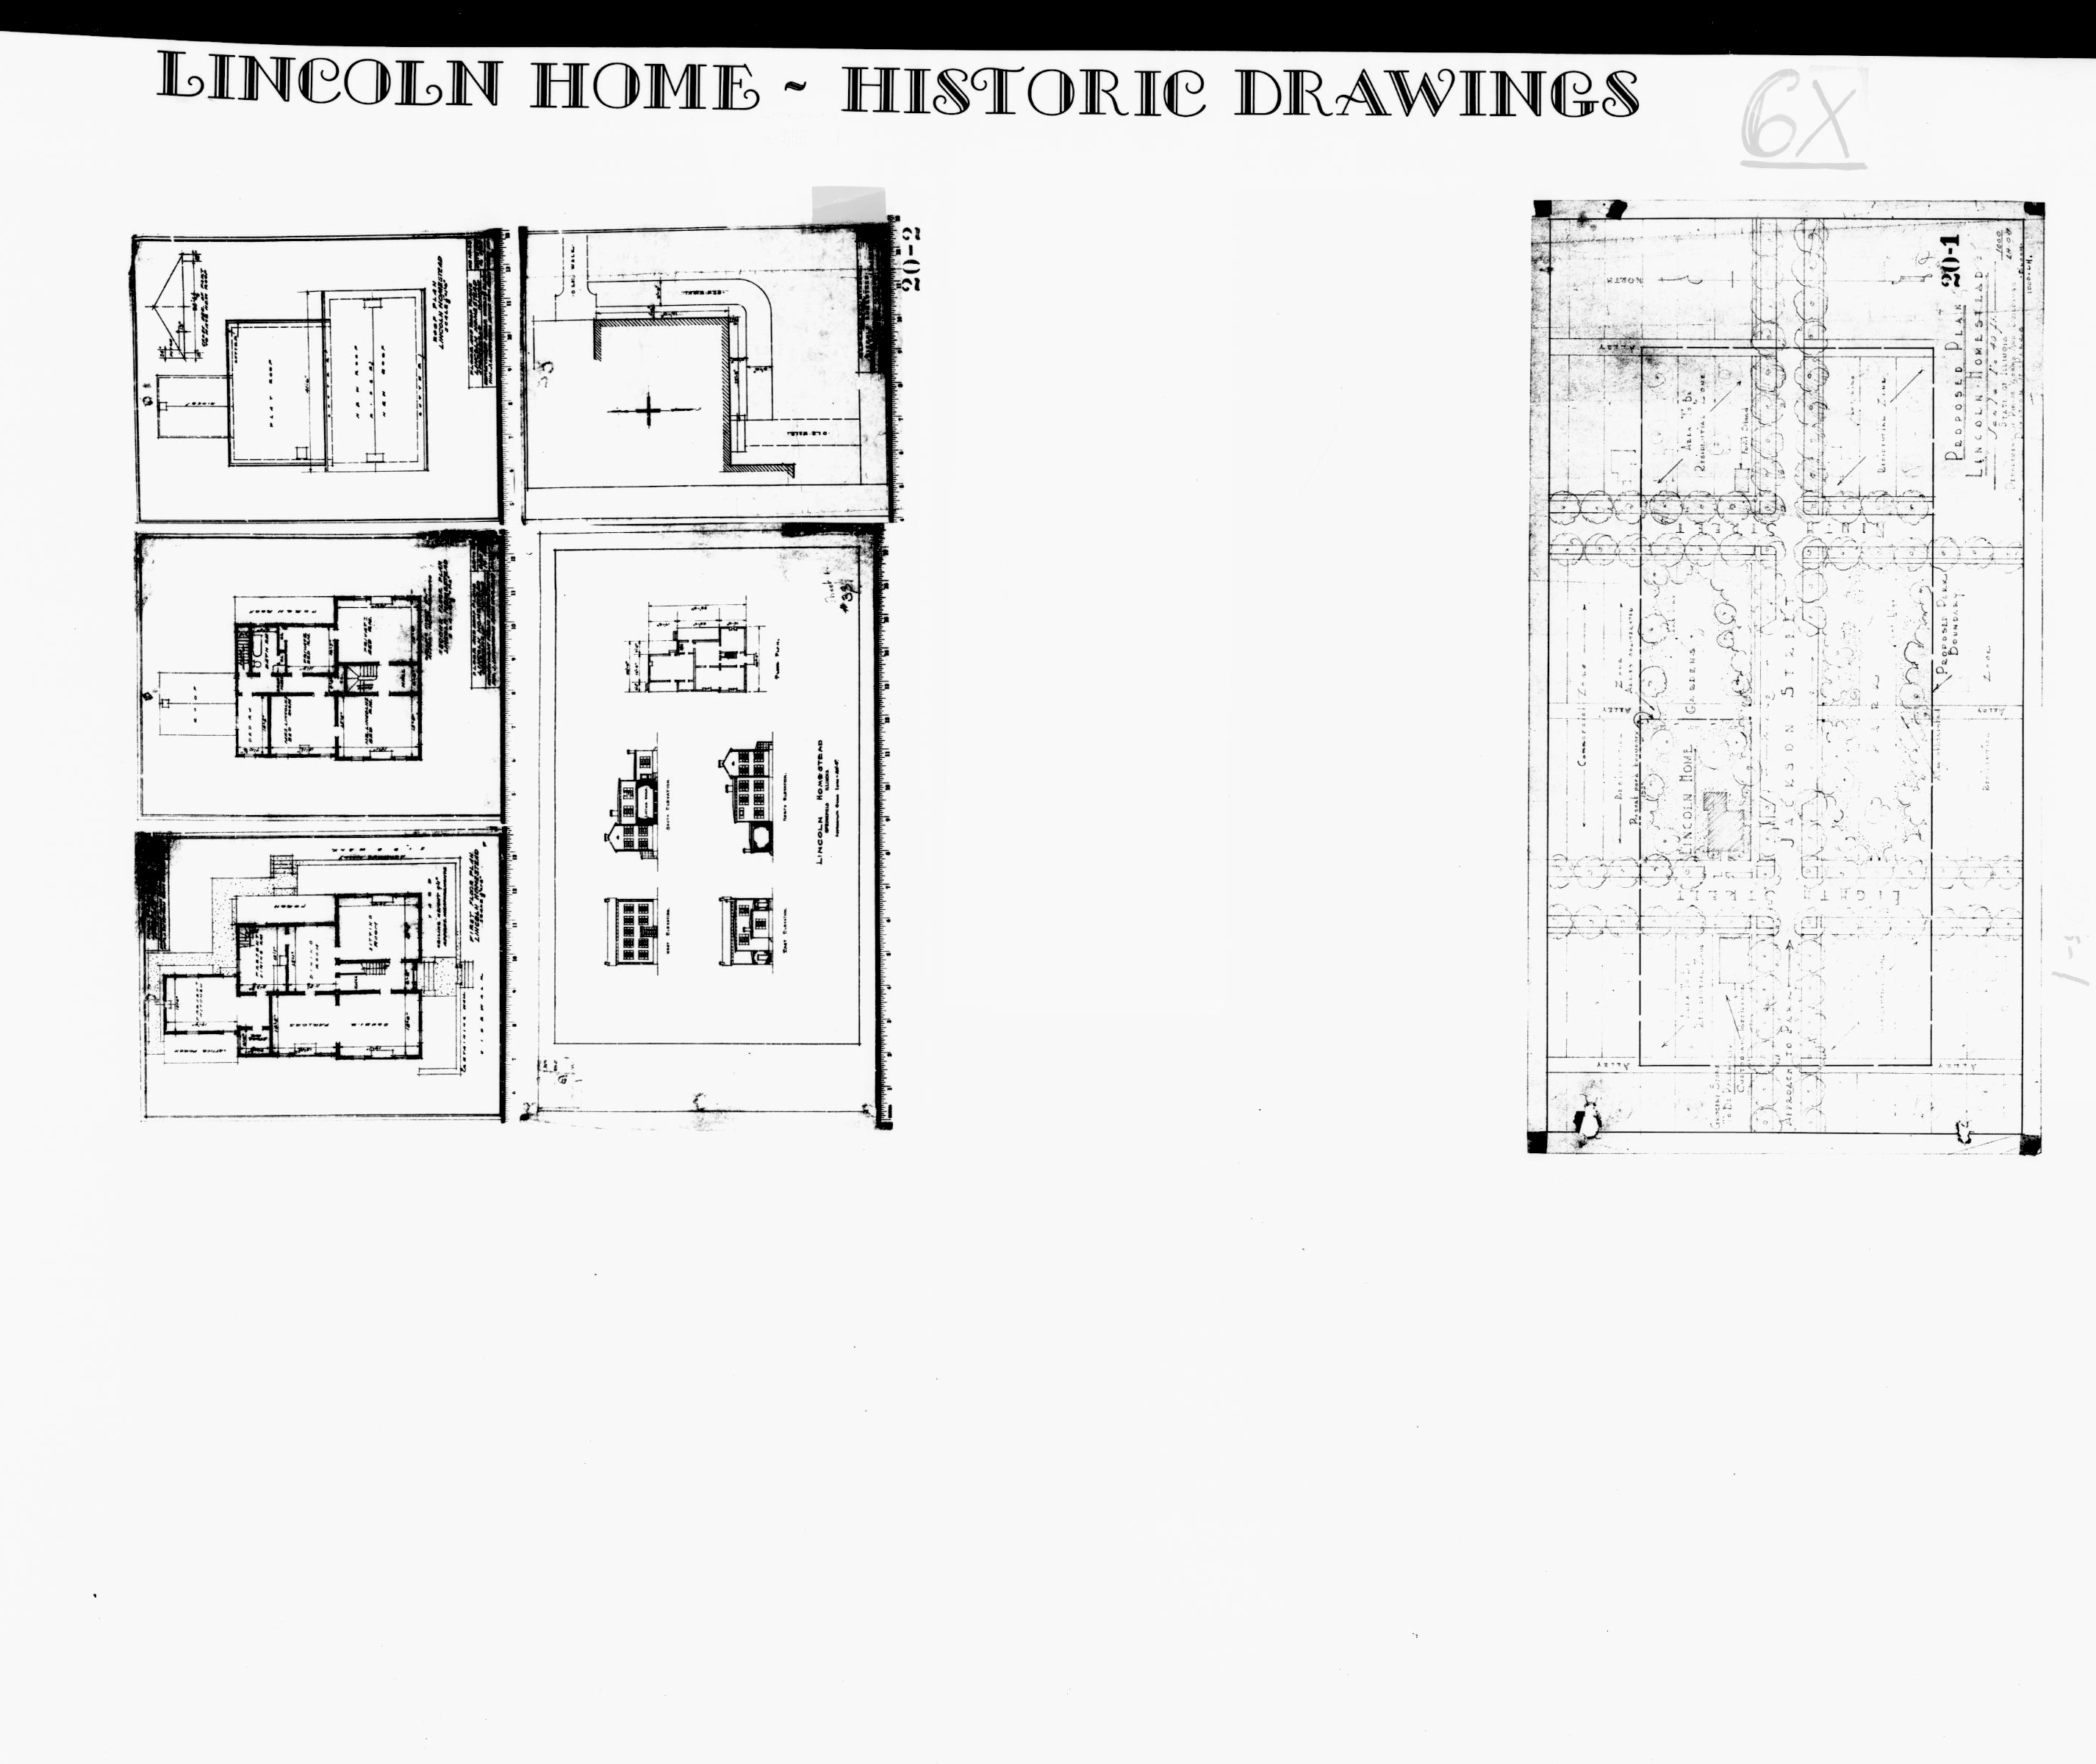 Lincoln Home - Historic Drawings  6 Lincoln, home, historic drawings